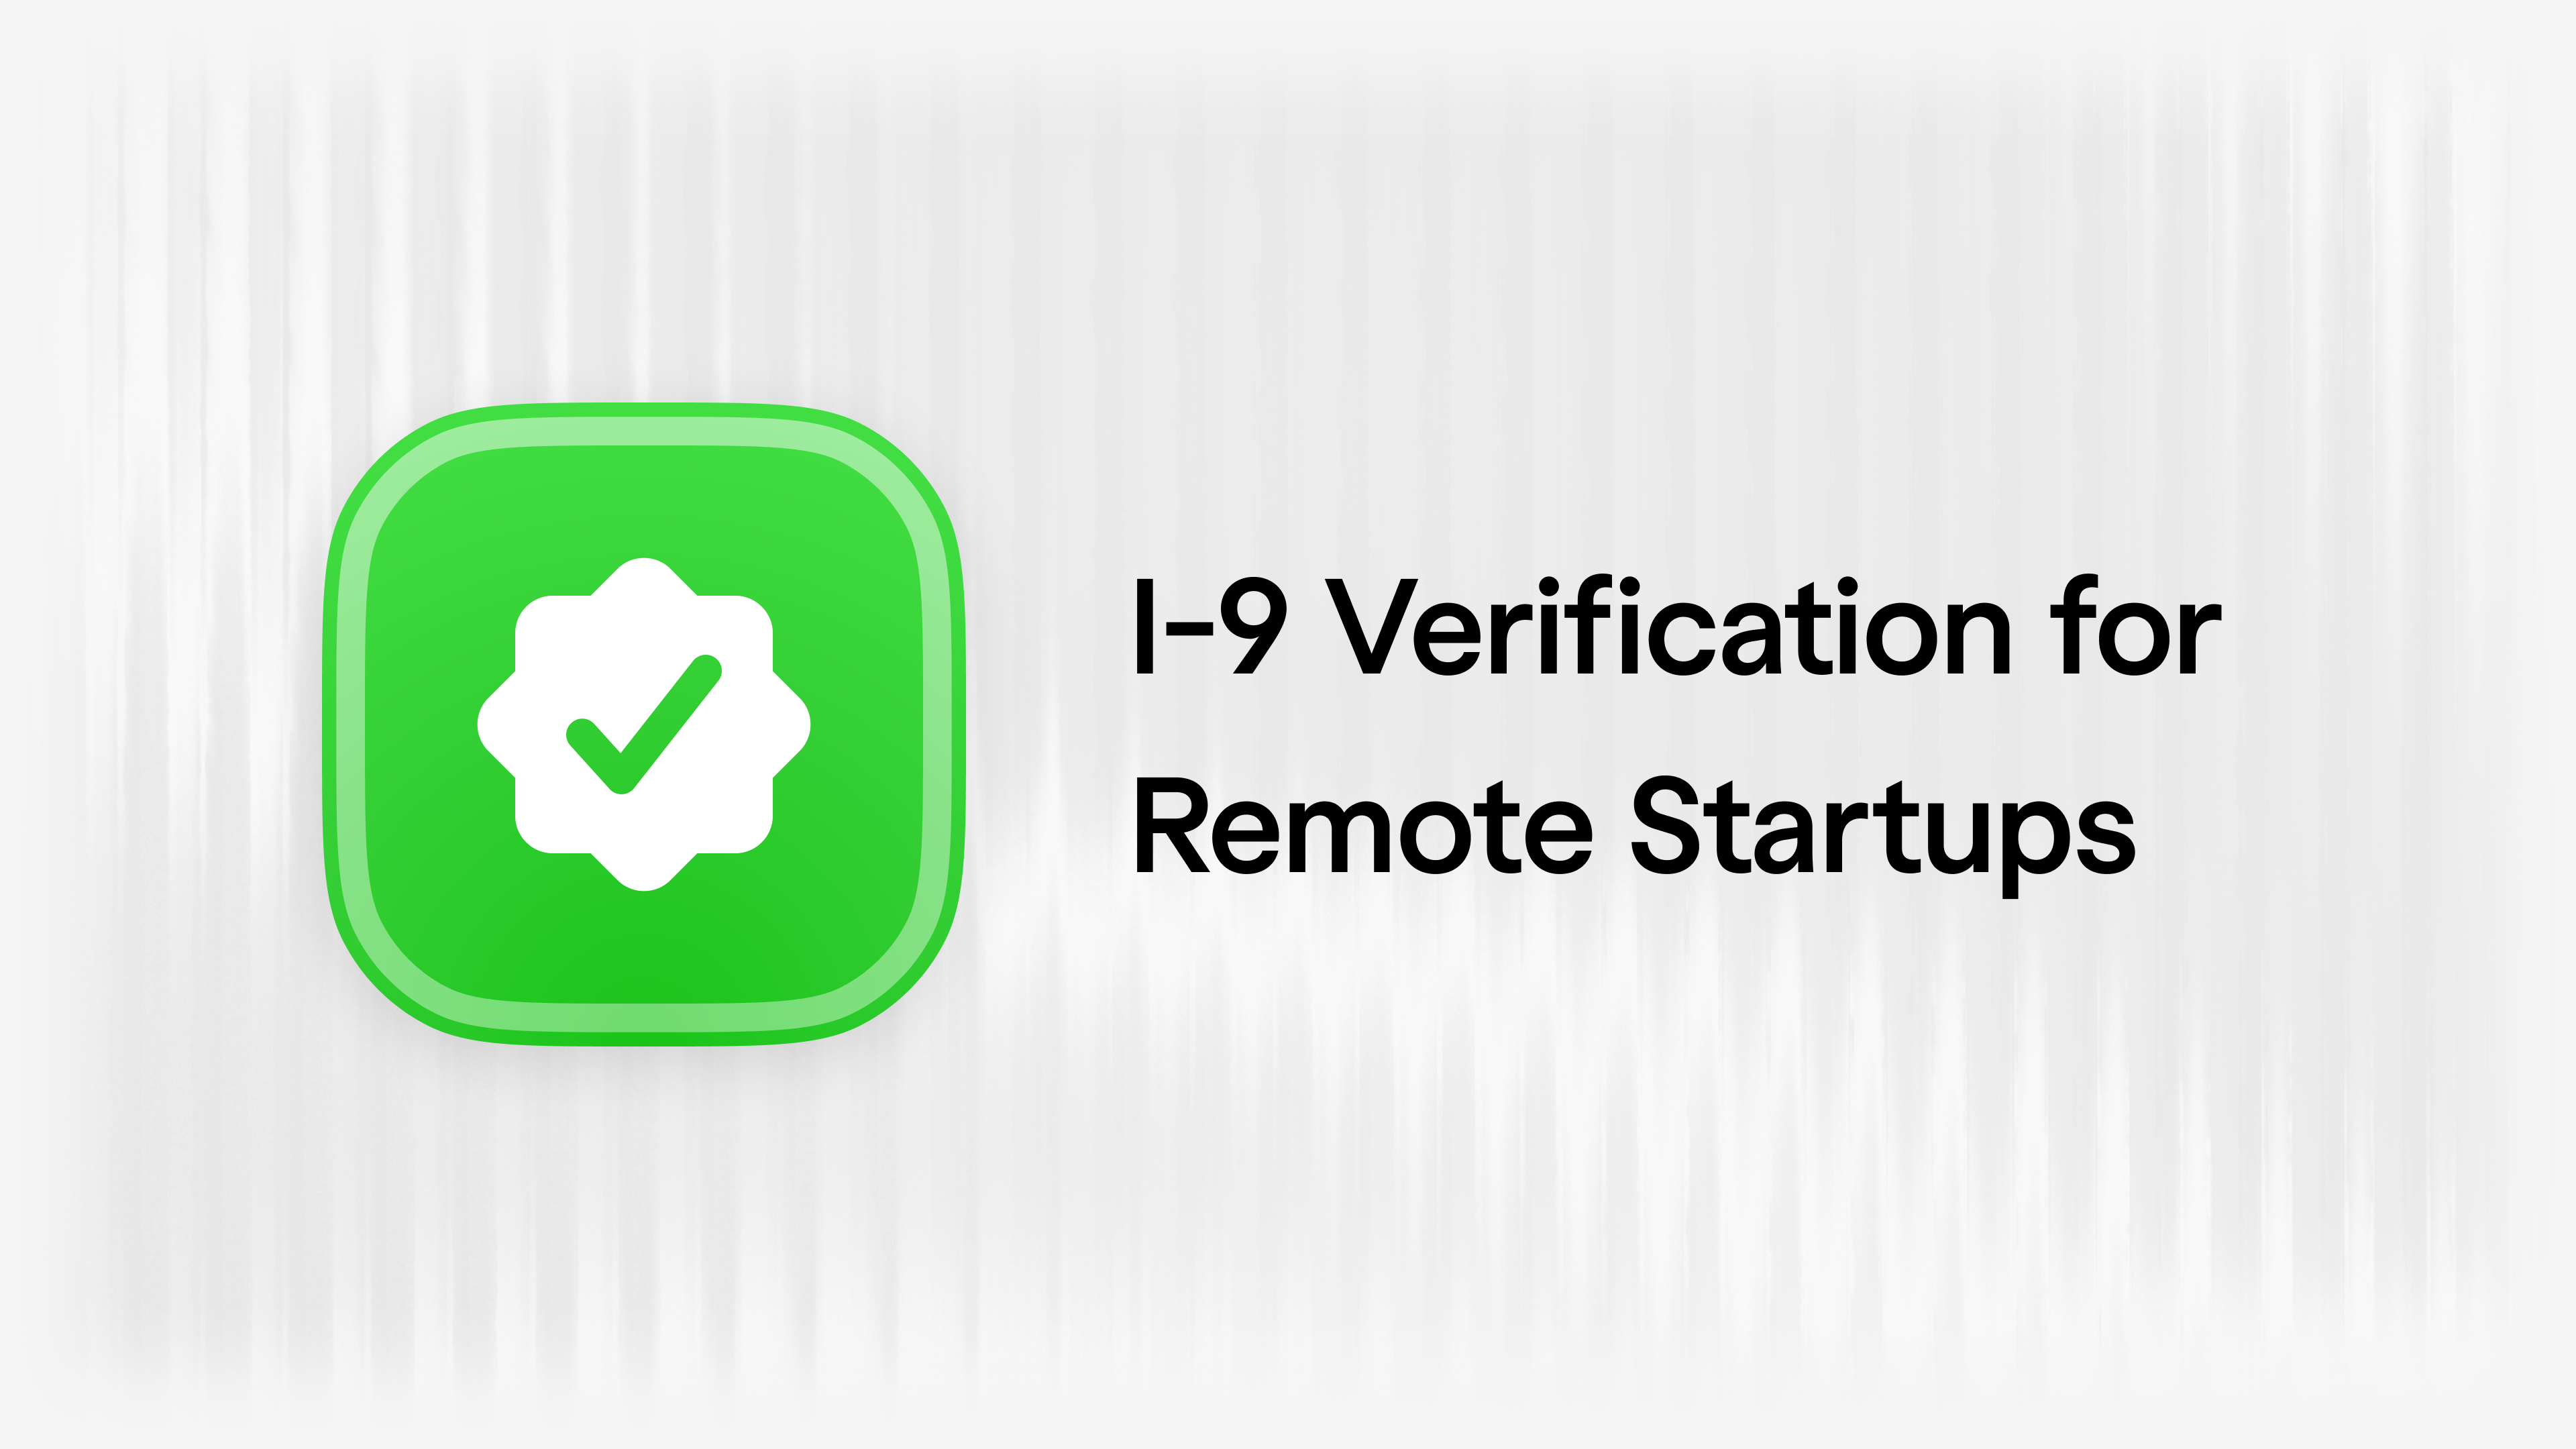 What Do Employers Need to Know about Remote I-9 Verification? article visual